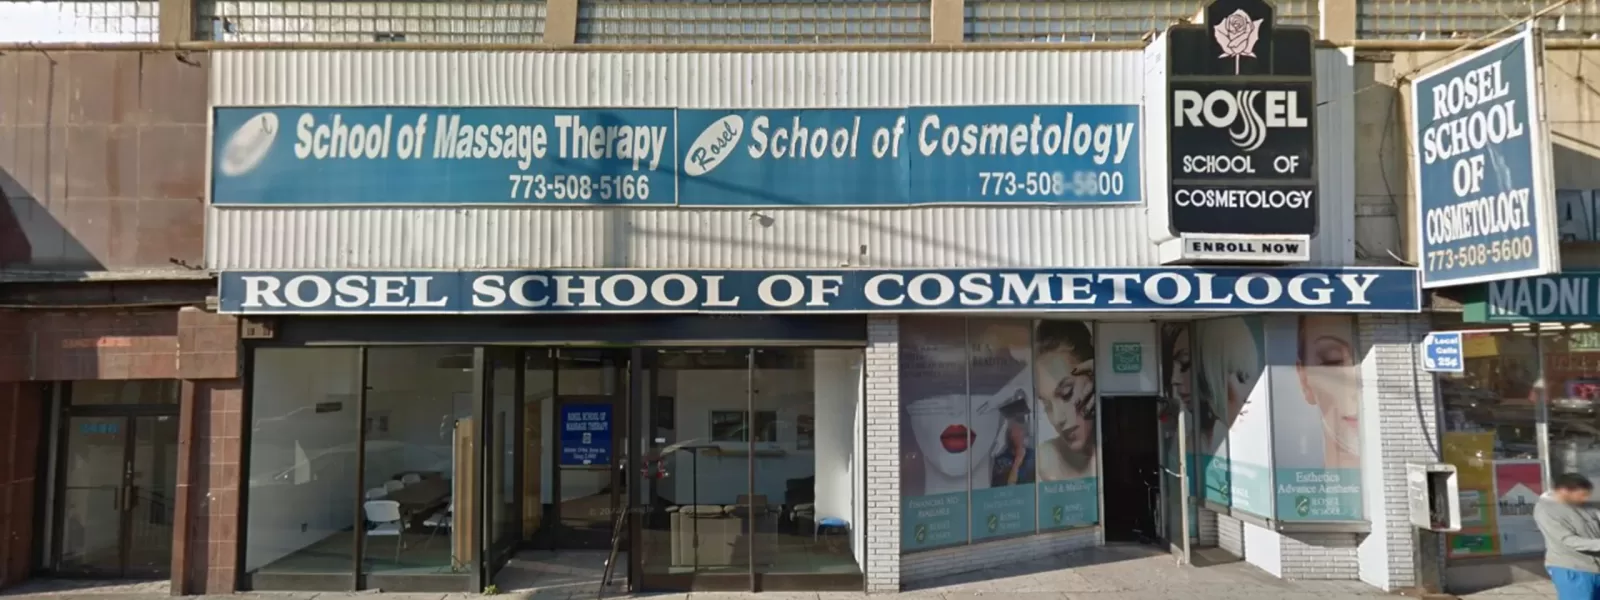 The old location of Rosel School of Cosmetology in Chicago